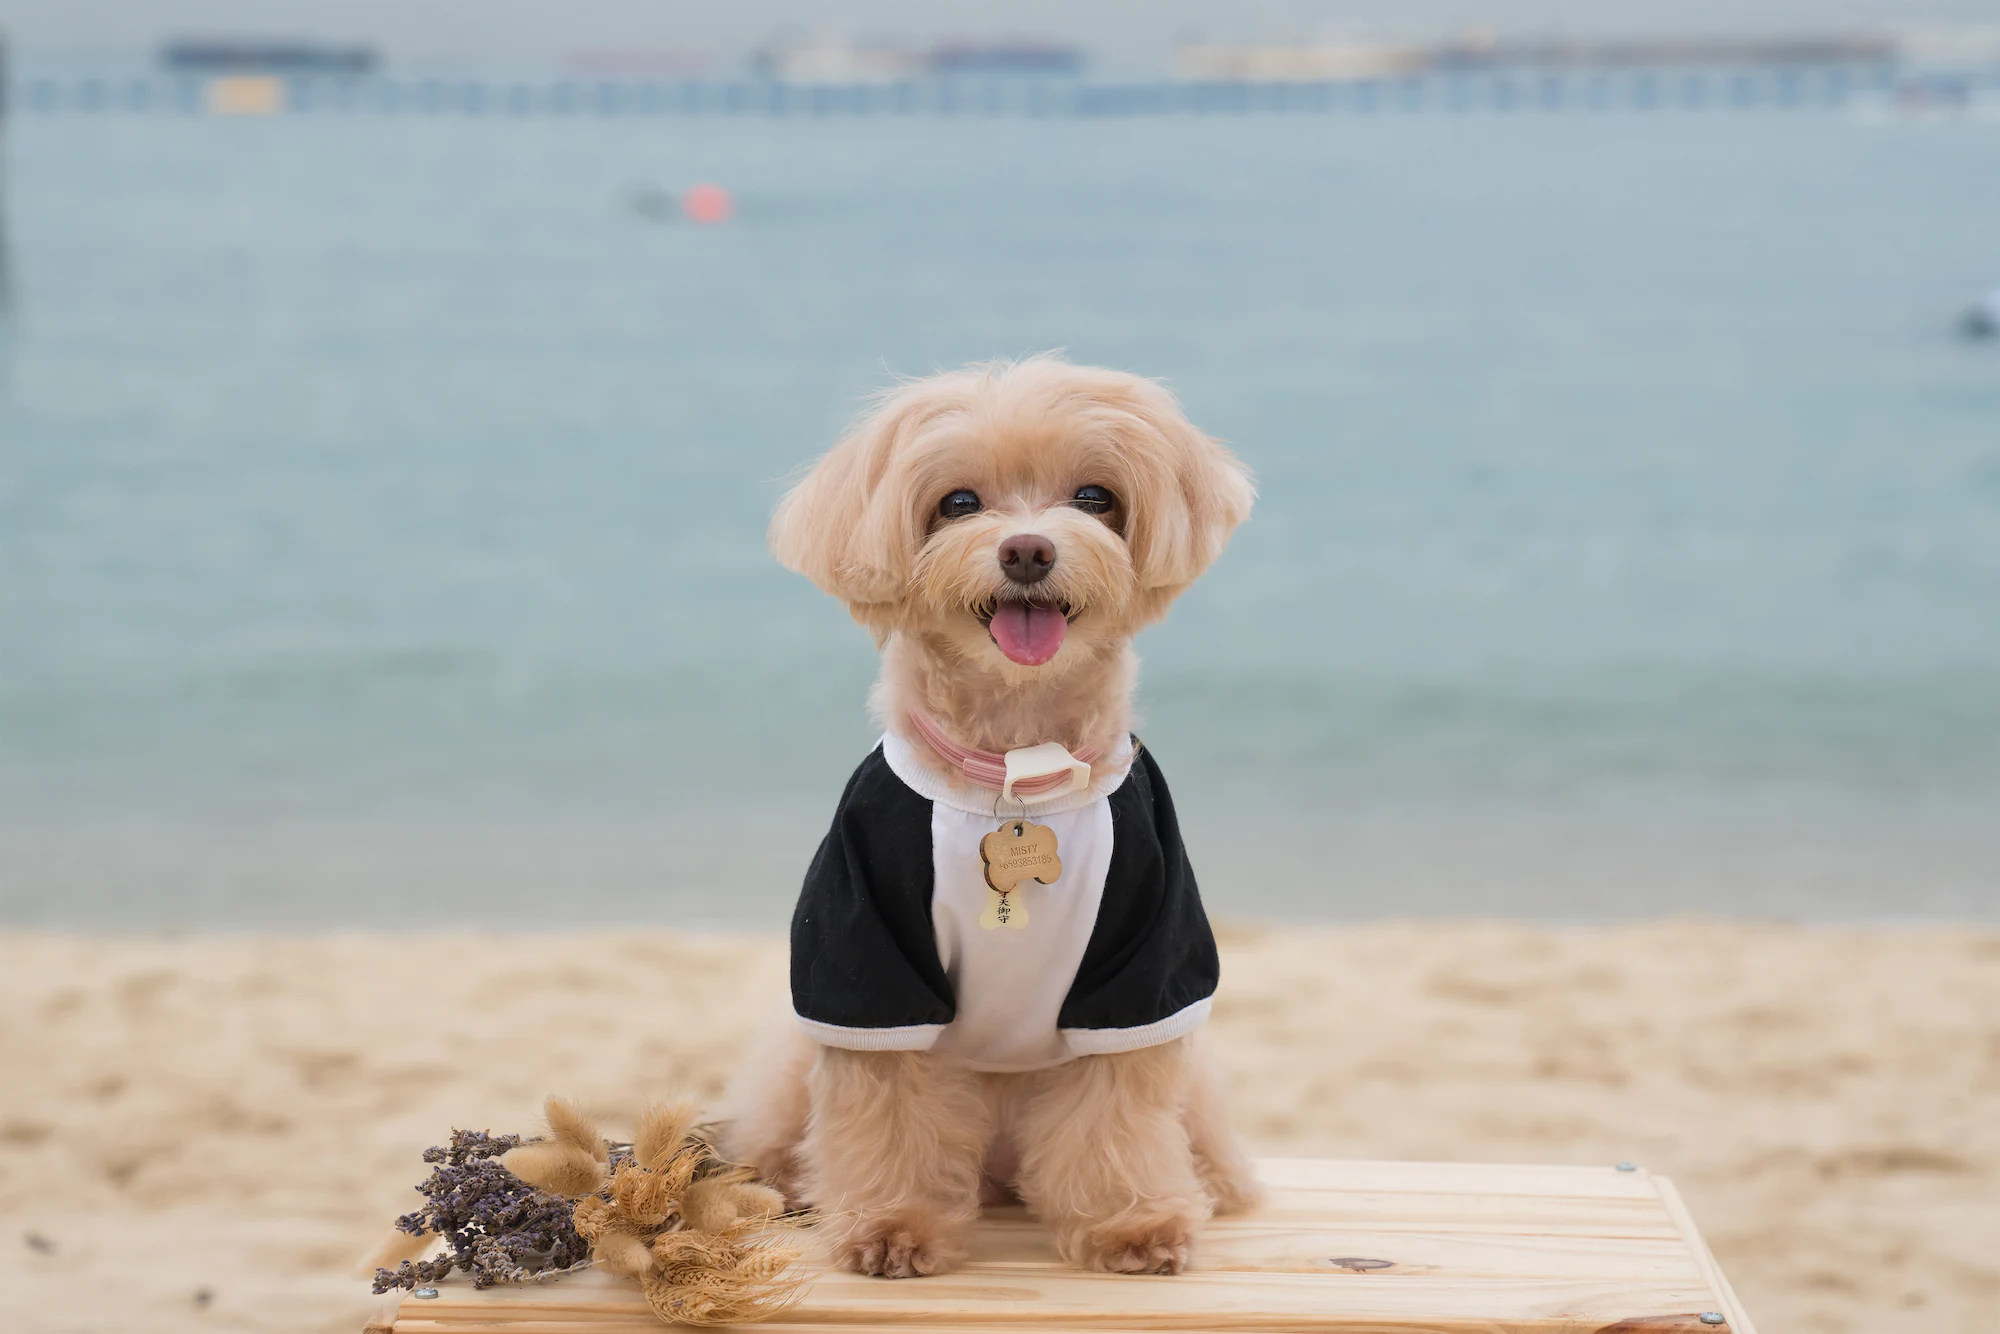 Tanjong Beach is an ideal place for a doggy shoot! There are both sand and sea to explore shots with the Alpha 7R III